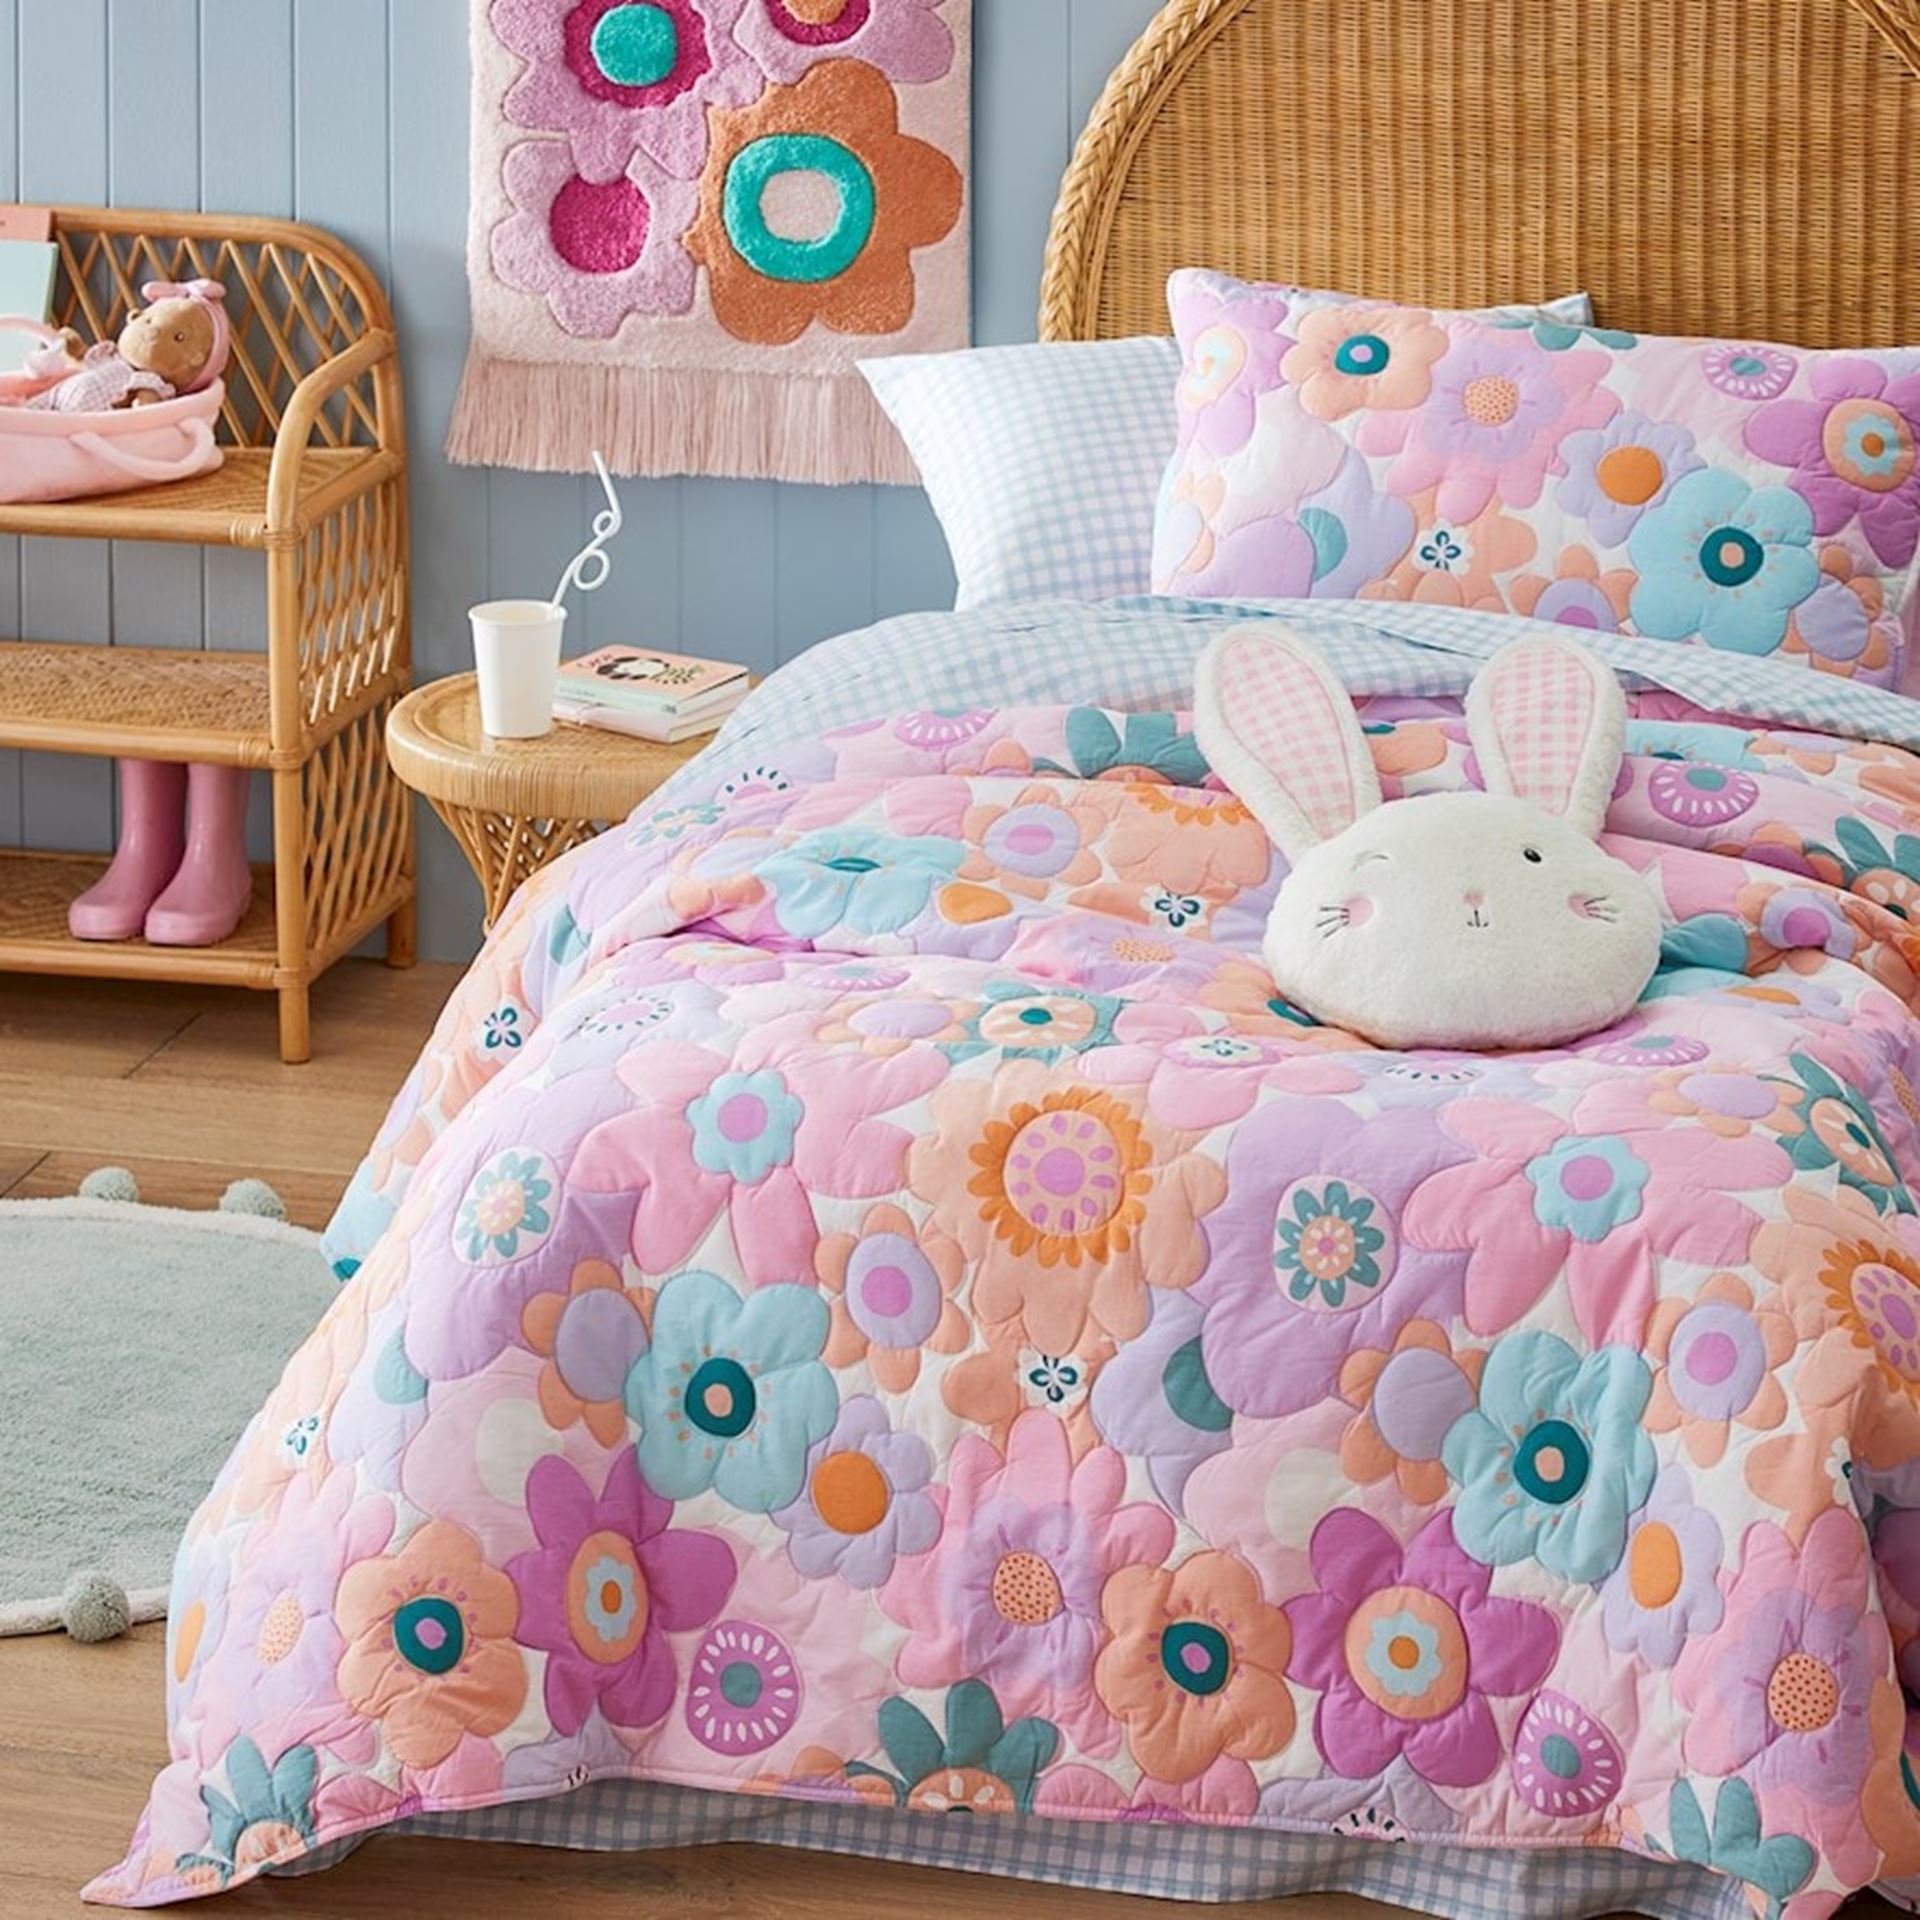 Adairs Kids - Poppy Floral Quilted Quilt Cover Set, Kids Bedroom